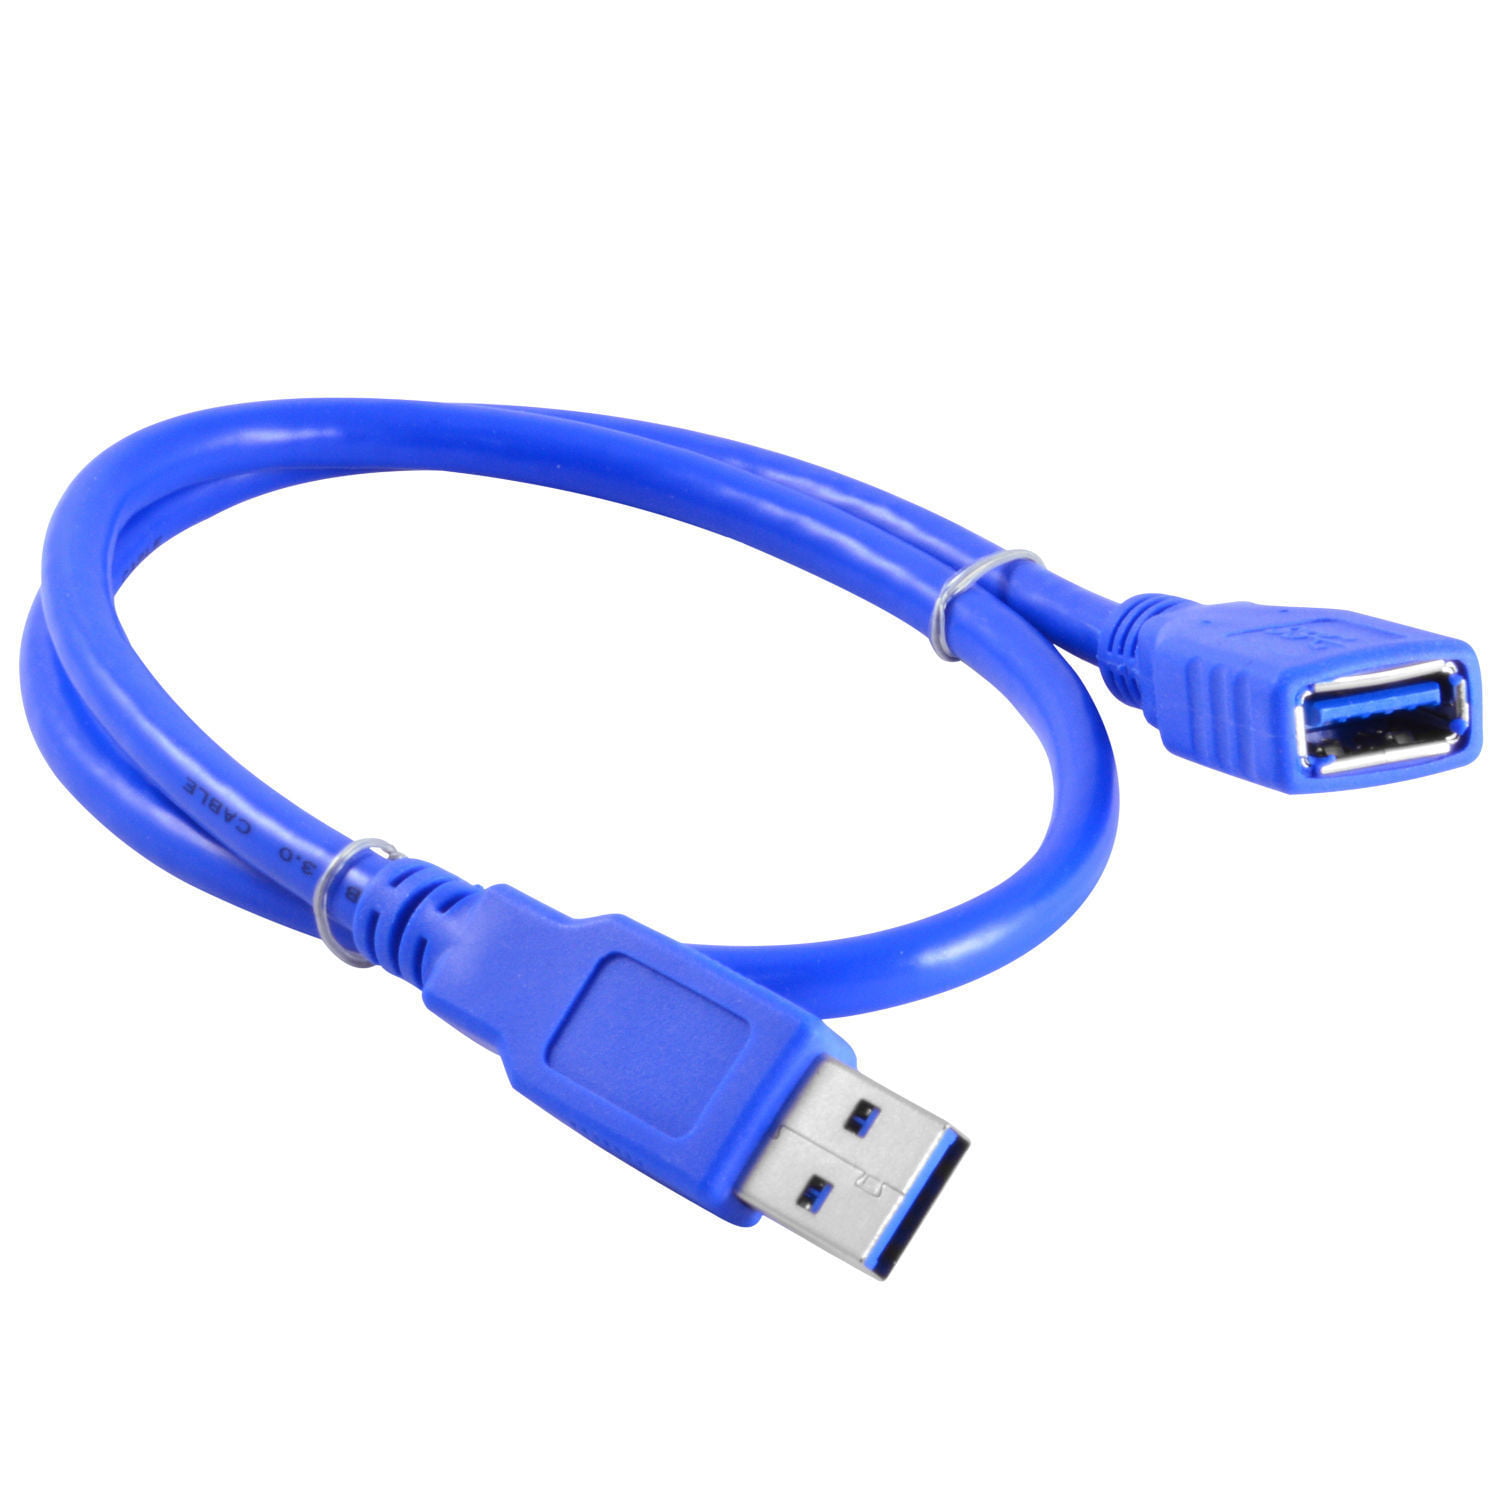 10Ft USB 3.0 A Male TO A Female Extension Cable Super Speed Blue Color CordBLUS 